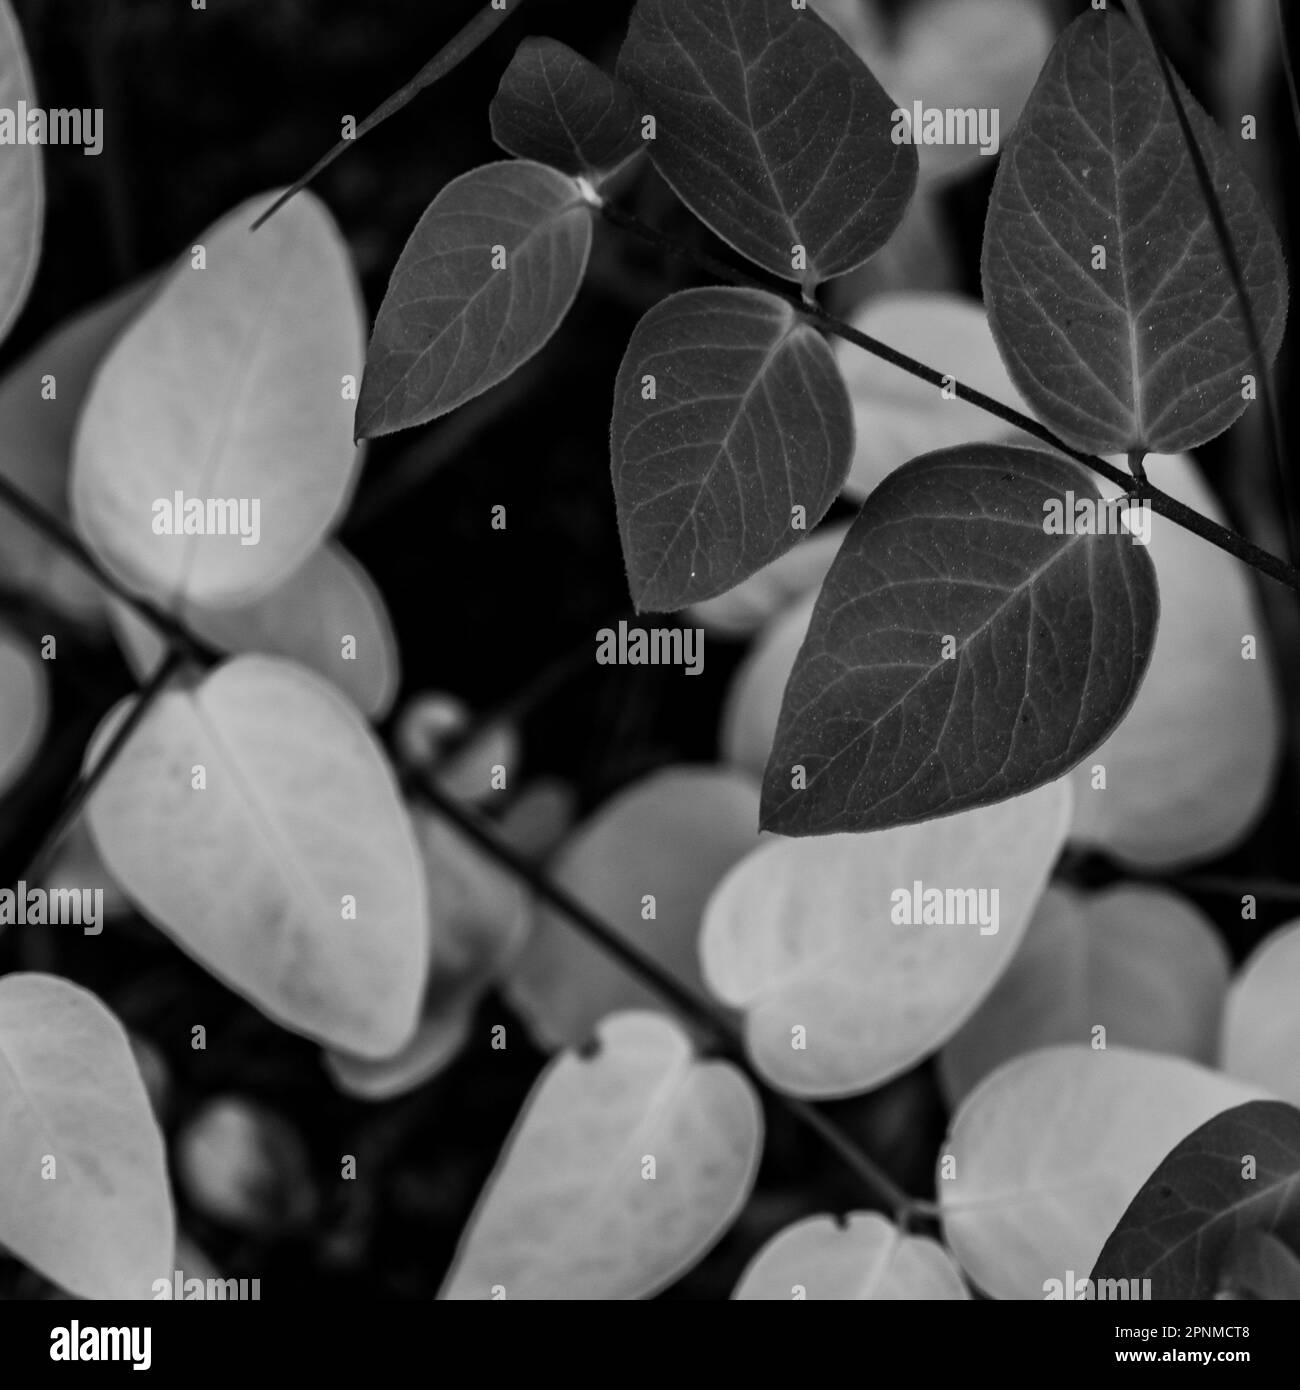 High Contrast Between Yellow And Green Leaves In Black and White abstract nature image Stock Photo